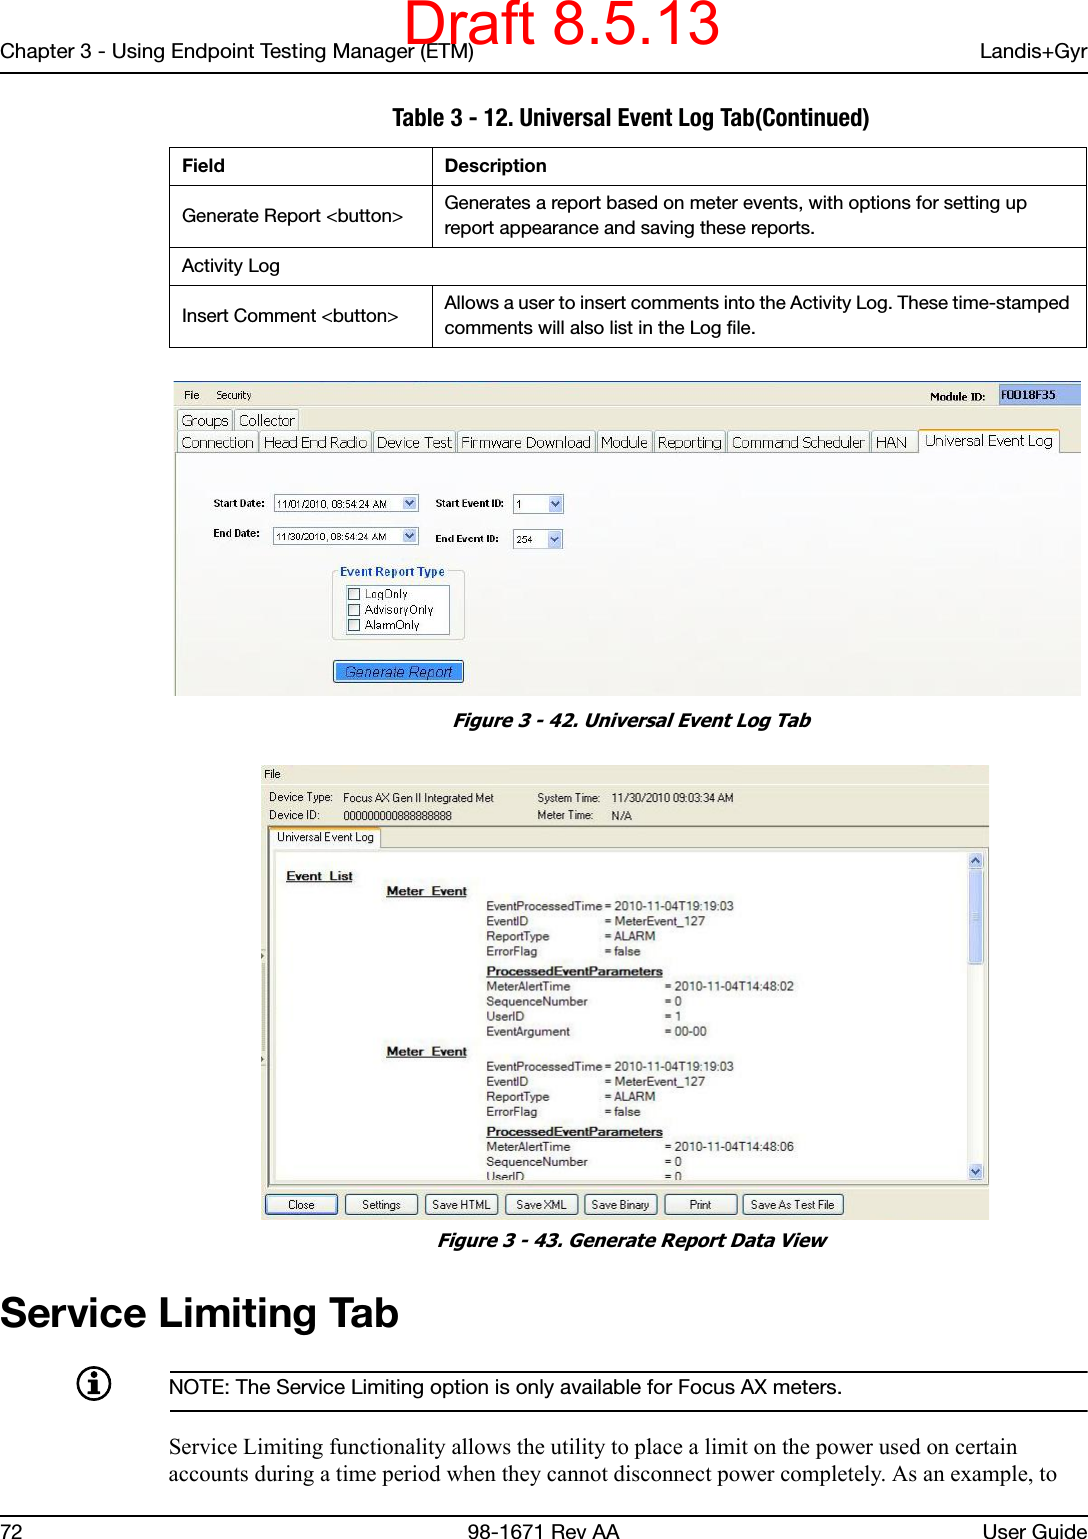 Chapter 3 - Using Endpoint Testing Manager (ETM) Landis+Gyr72 98-1671 Rev AA User Guide Figure 3 - 42. Universal Event Log Tab Figure 3 - 43. Generate Report Data ViewService Limiting TabNOTE: The Service Limiting option is only available for Focus AX meters.Service Limiting functionality allows the utility to place a limit on the power used on certain accounts during a time period when they cannot disconnect power completely. As an example, to Generate Report &lt;button&gt; Generates a report based on meter events, with options for setting up report appearance and saving these reports.Activity LogInsert Comment &lt;button&gt; Allows a user to insert comments into the Activity Log. These time-stamped comments will also list in the Log file. Table 3 - 12. Universal Event Log Tab(Continued)Field DescriptionDraft 8.5.13